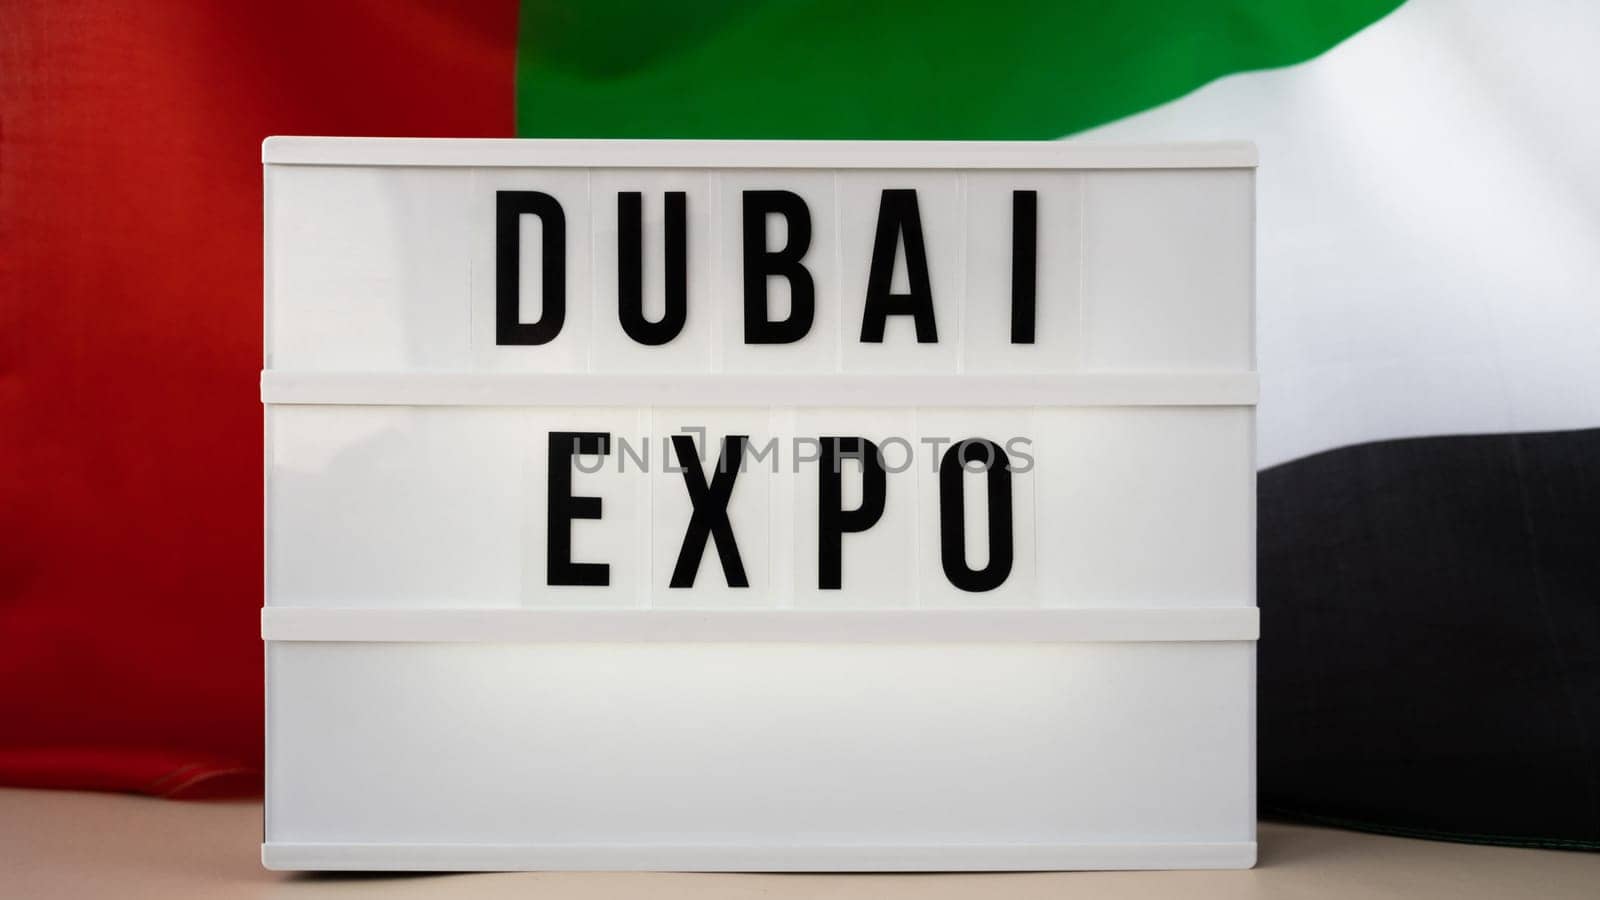 Lightbox with text DUBAI EXPO on background of waving UAE flag made from silk. United Arab Emirates flag with concept of tourism and traveling. Inviting greeting card, advertisement. Dubai welcoming card